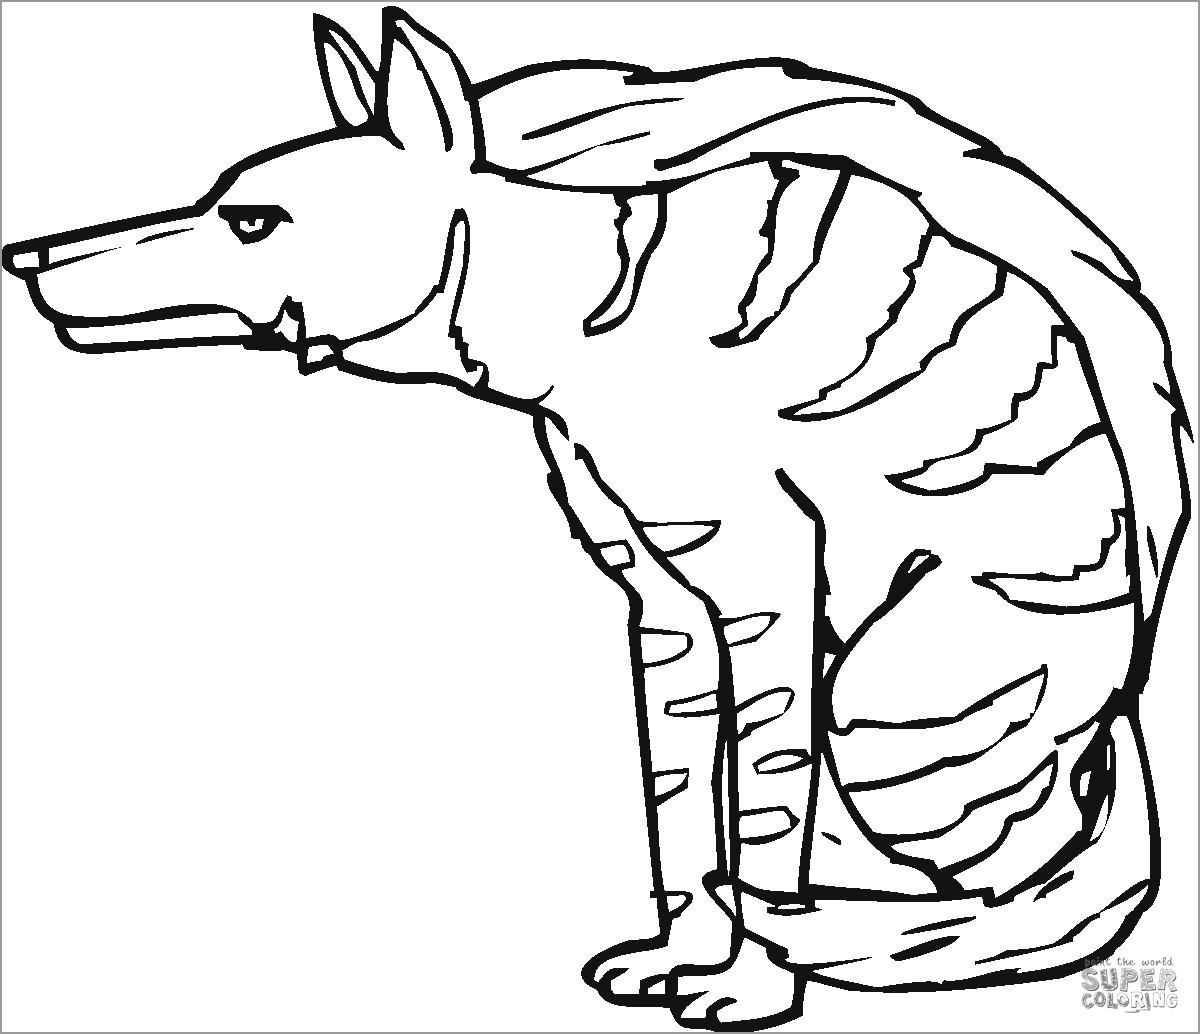 Coloring Page Of A Hyena